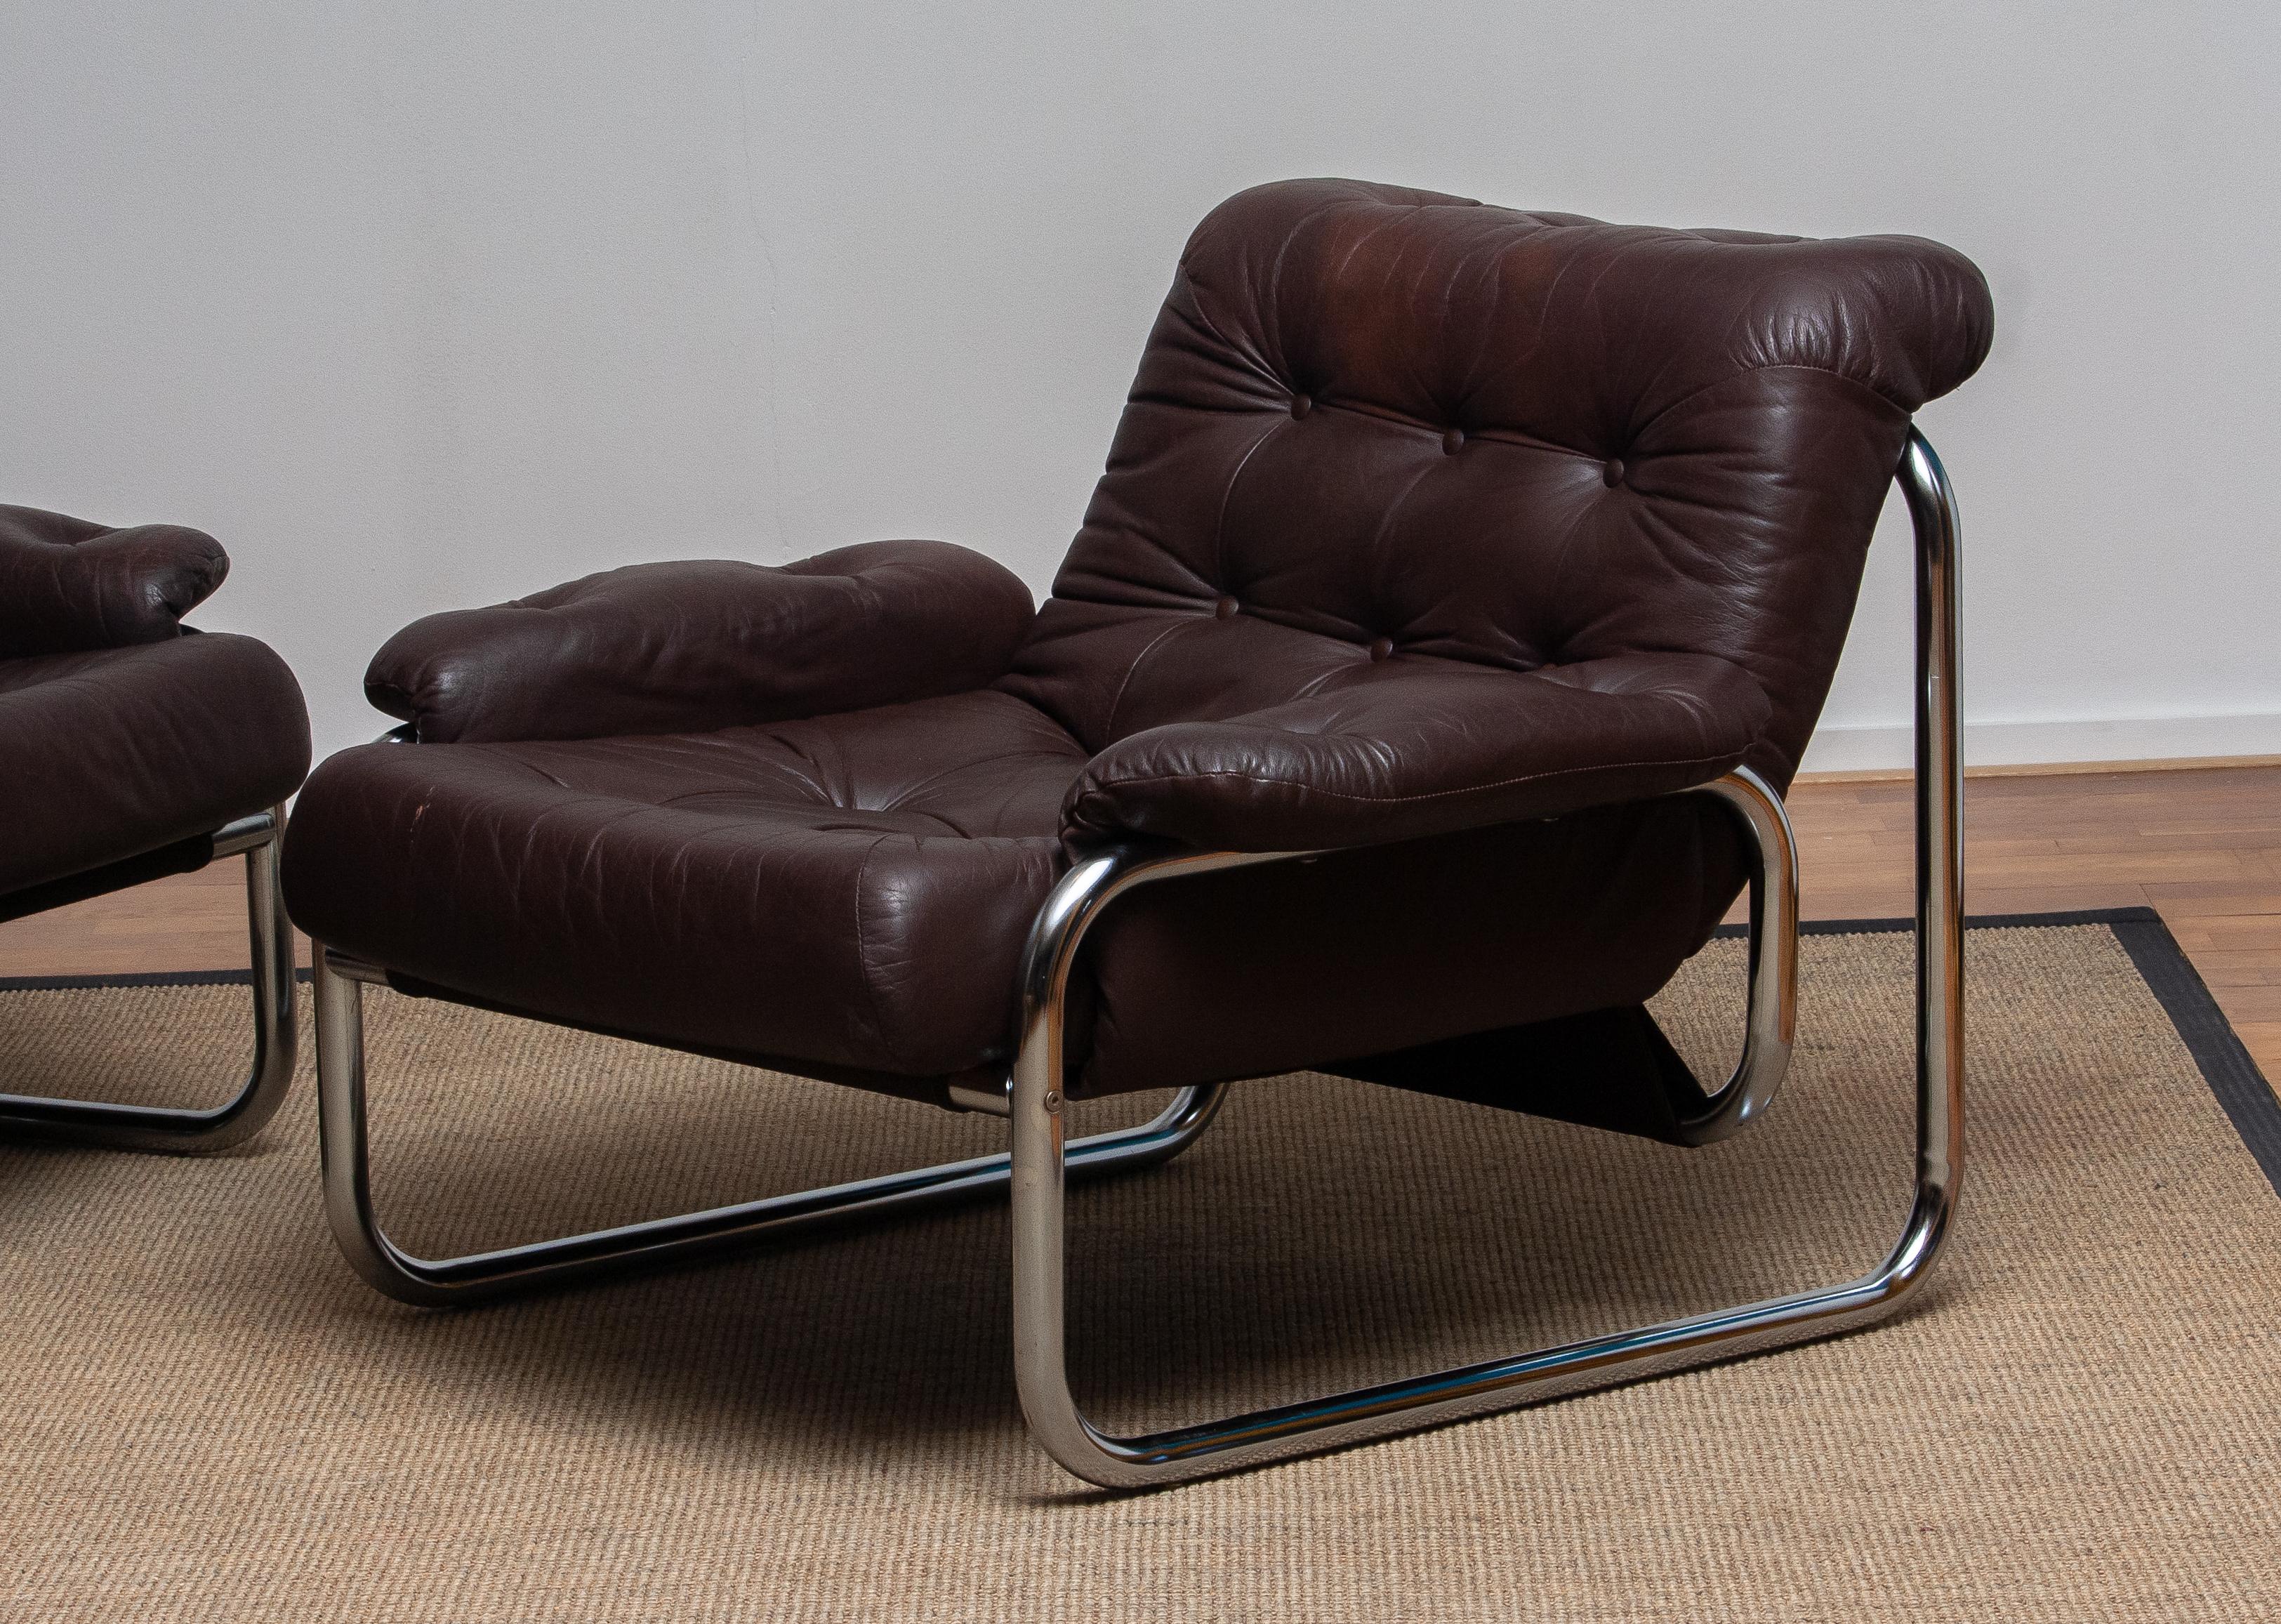 Pair of lounge / easy chairs model 'Troligen' designed by Johan Bertil Häggström for Sved Form, Sweden
These chairs are made of a tubular metal chromed frame with brown leather cushions and armrests.
They are in a wonderful condition.
Produced in